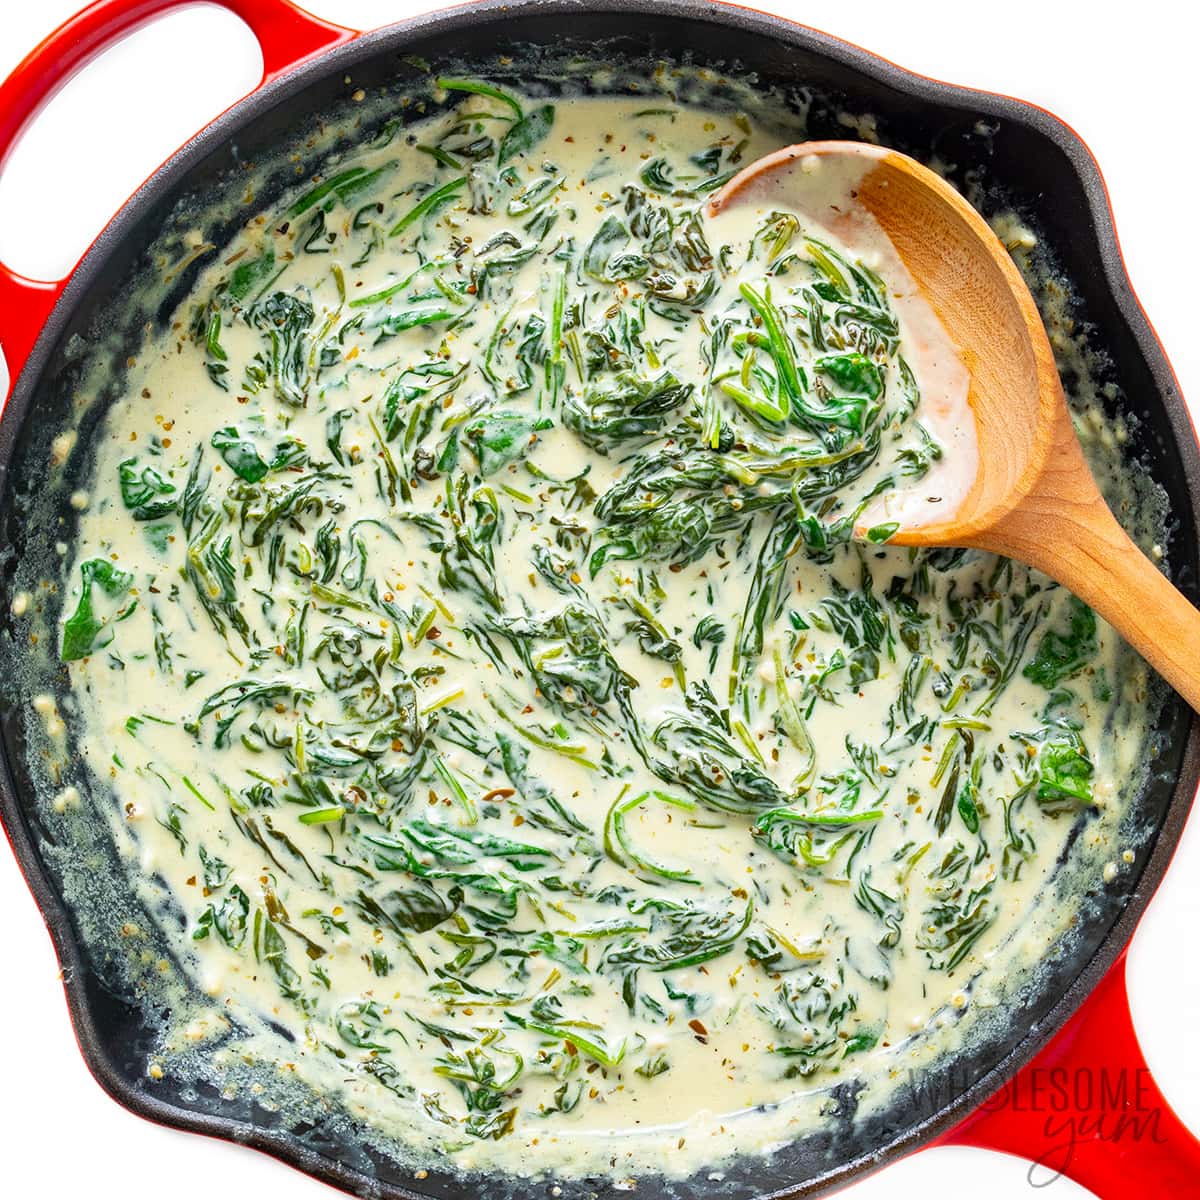 Finished creamed spinach recipe.